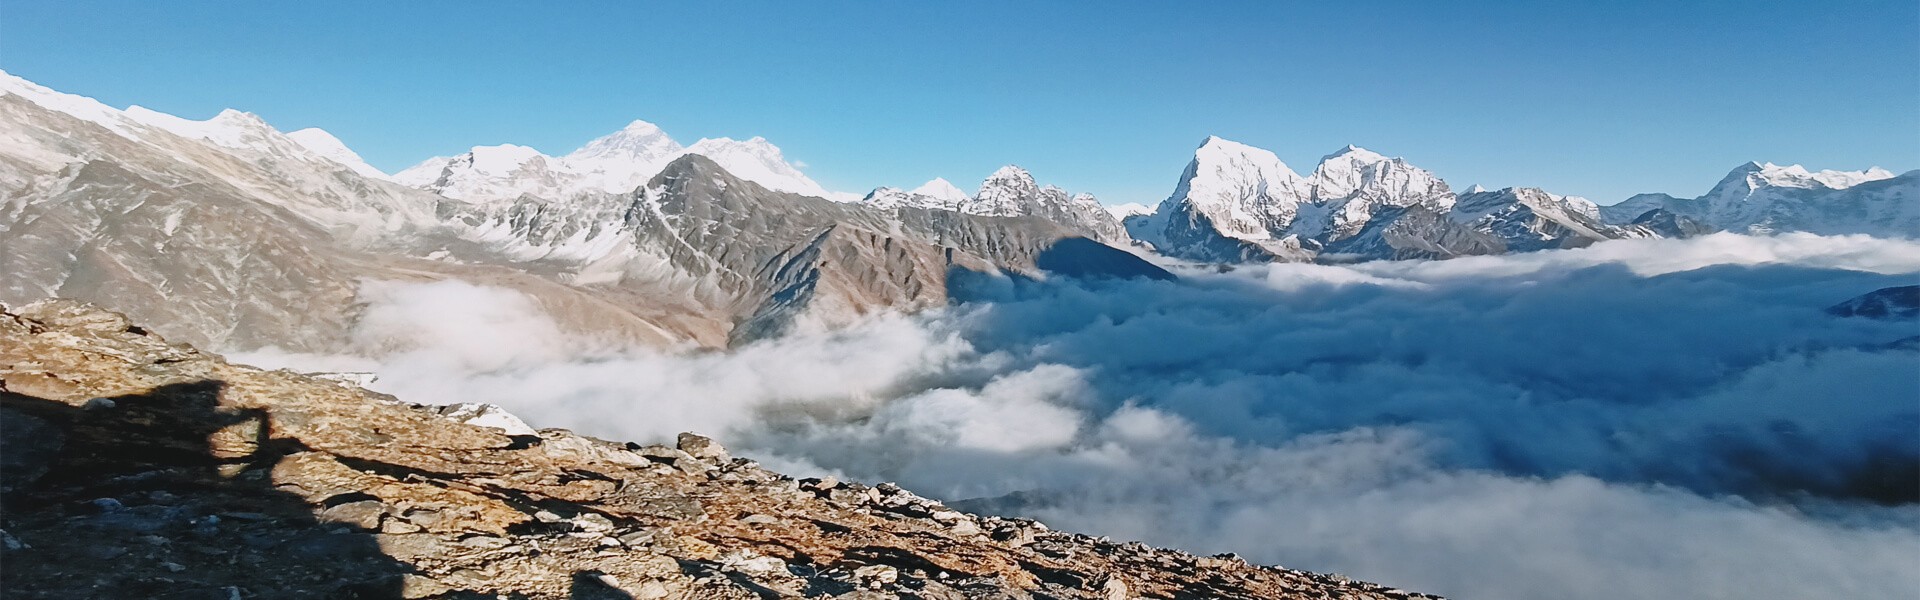 Everest Base Camp view from Kala Patthar